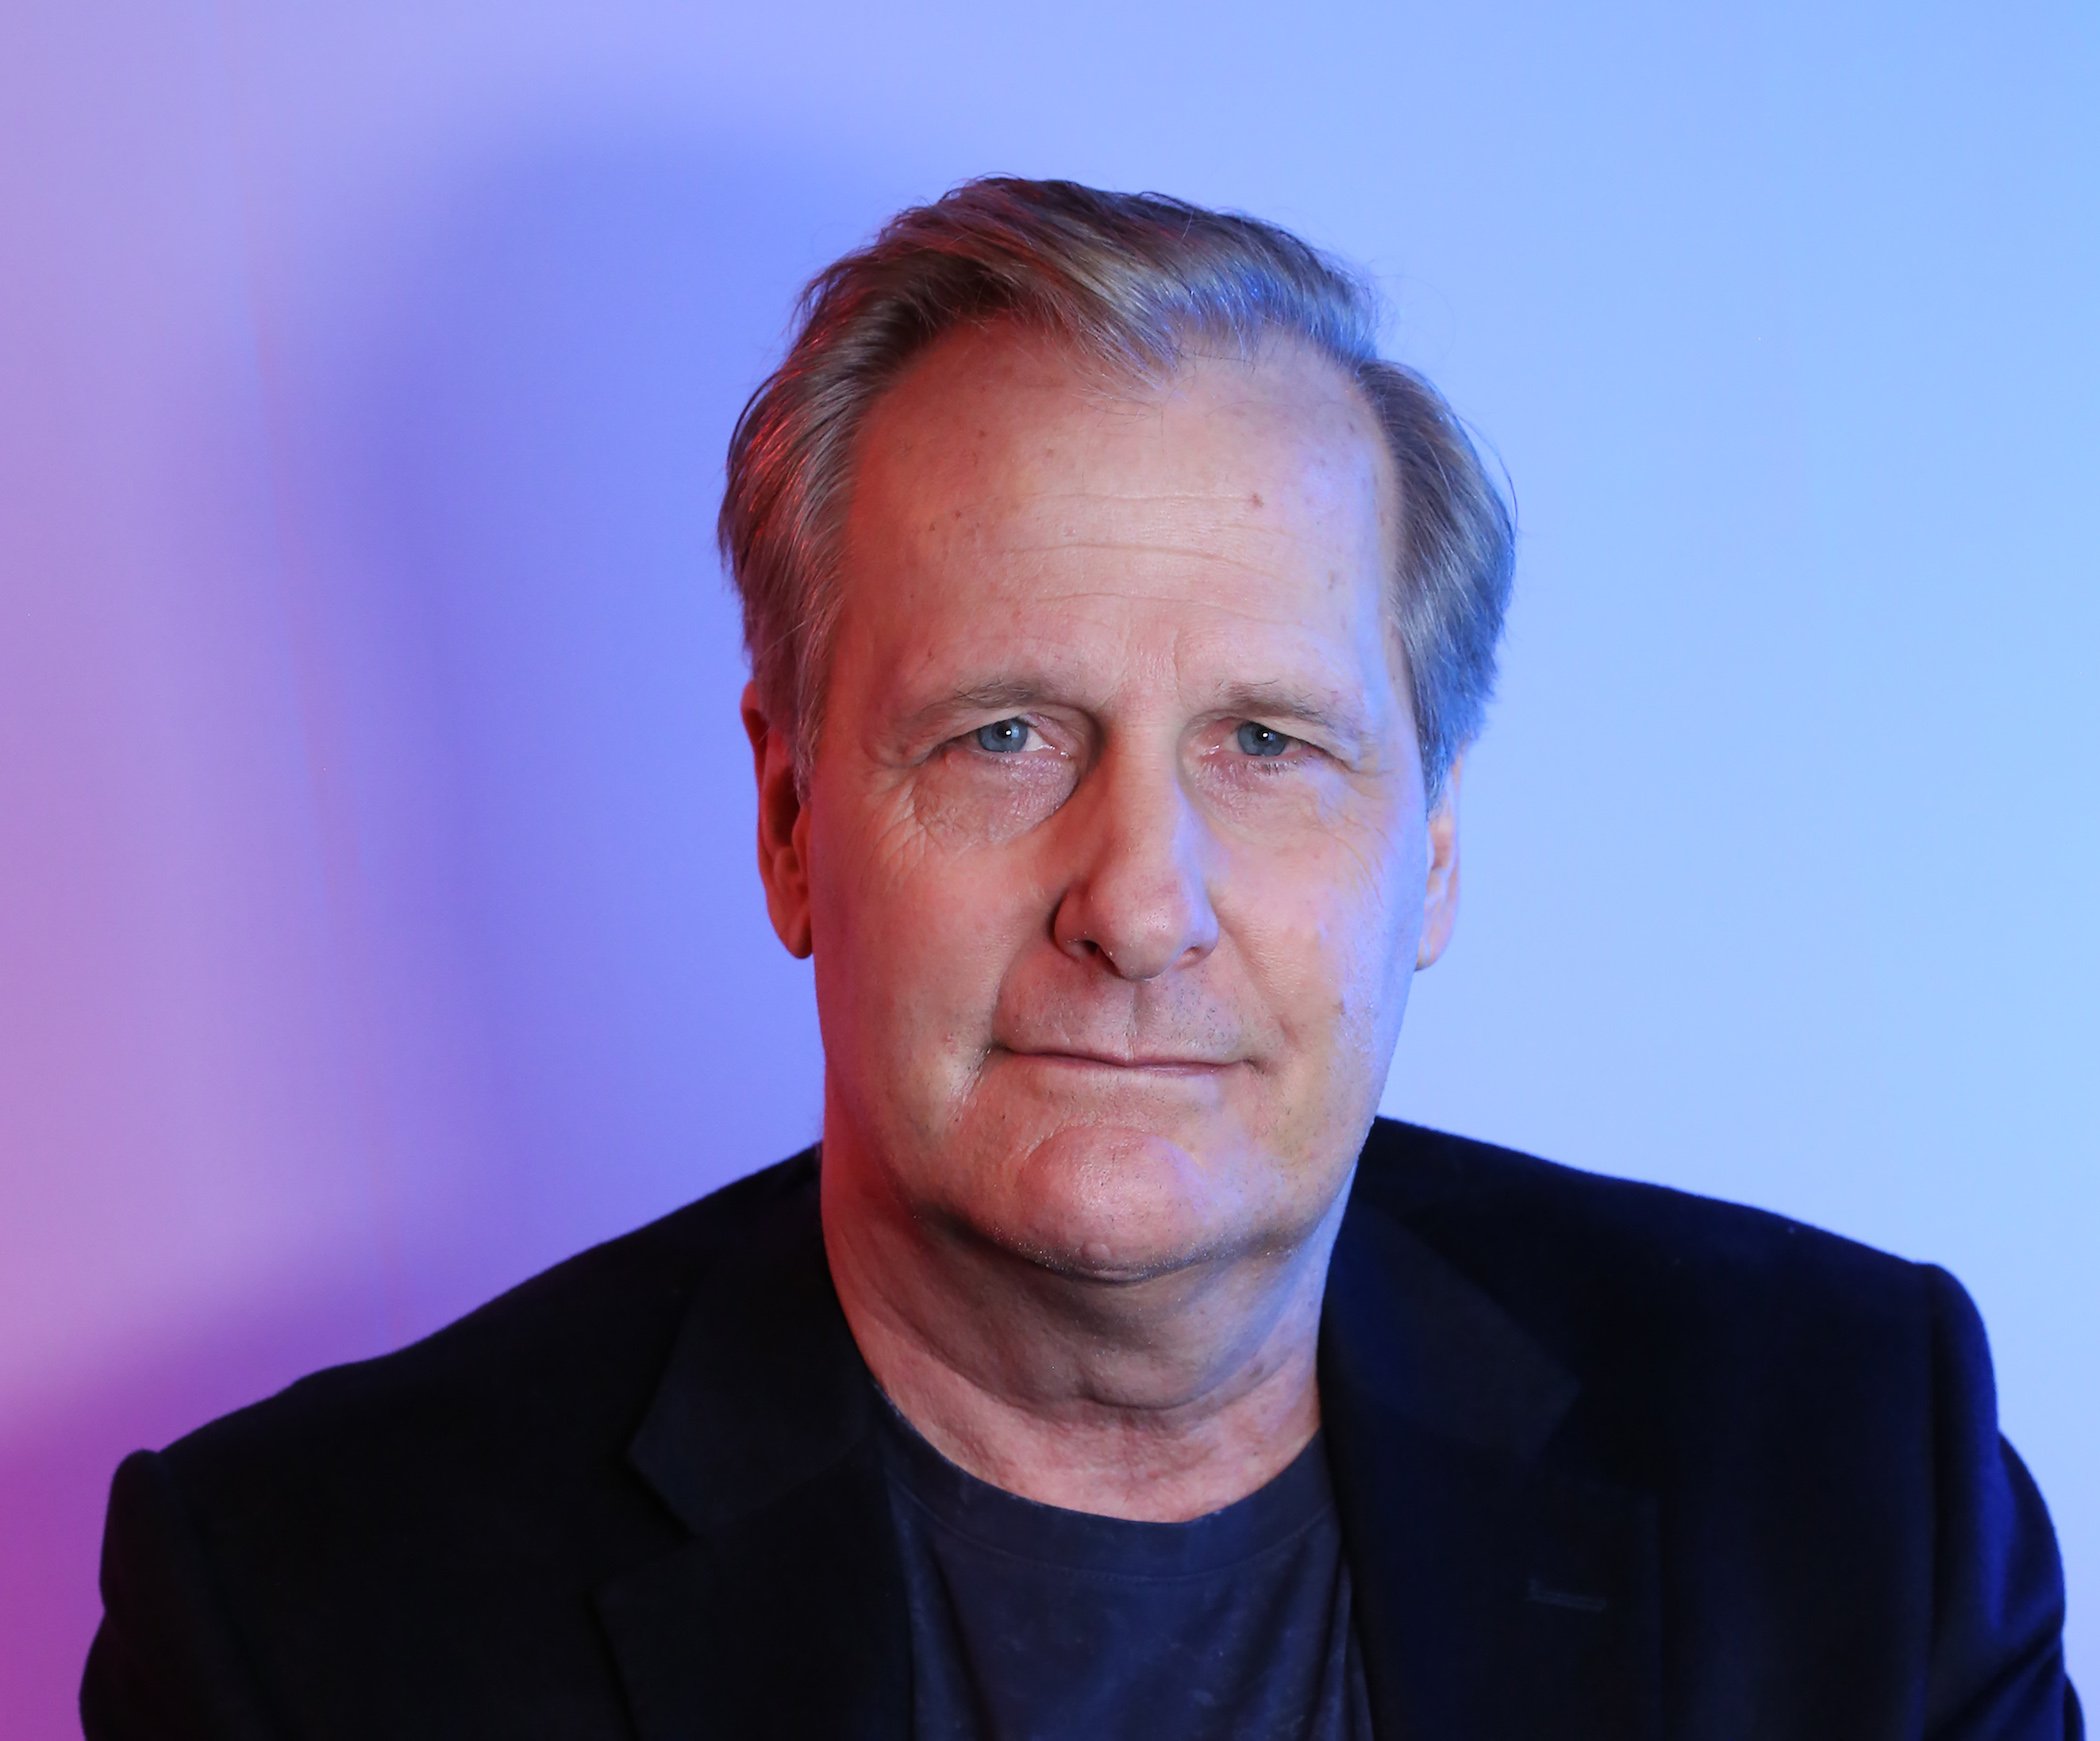 Jeff Daniels of the 'American Rust' cast slightly smiling in a head shot against a blue/purple background